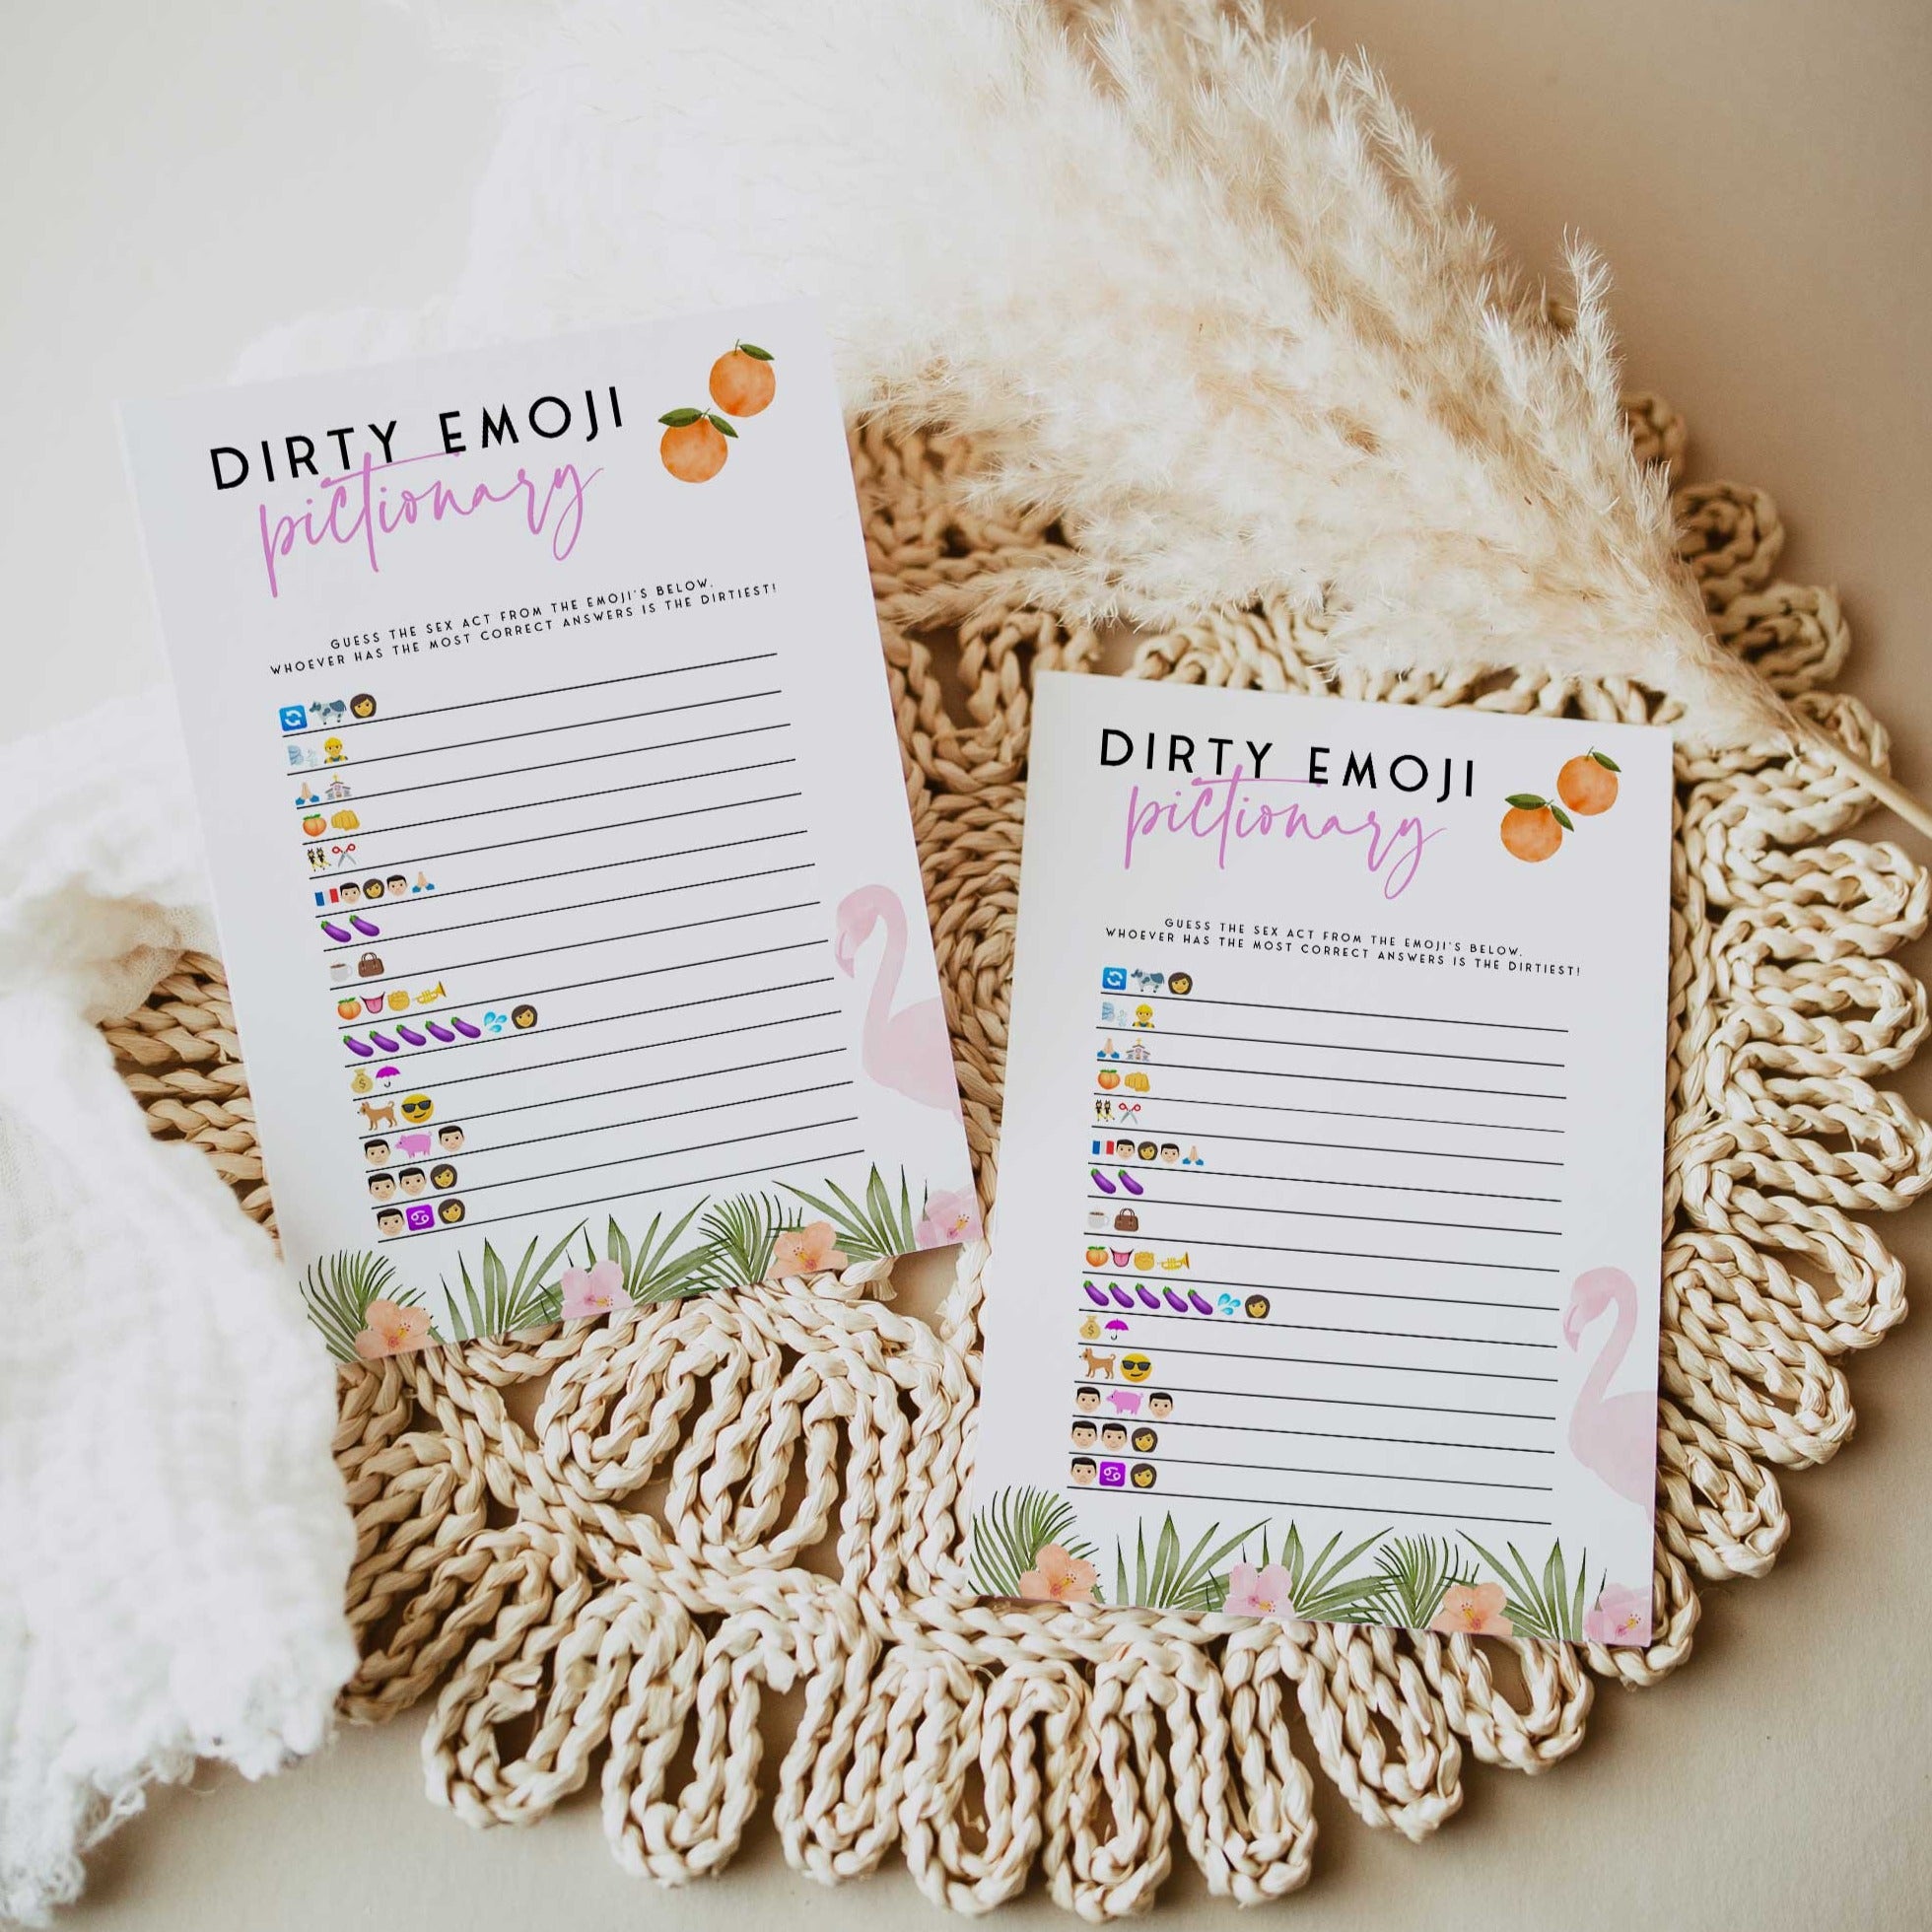 Fully editable and printable dirty emoji pictionary game with a miami design. Perfect for a miami, Bachelorette themed party